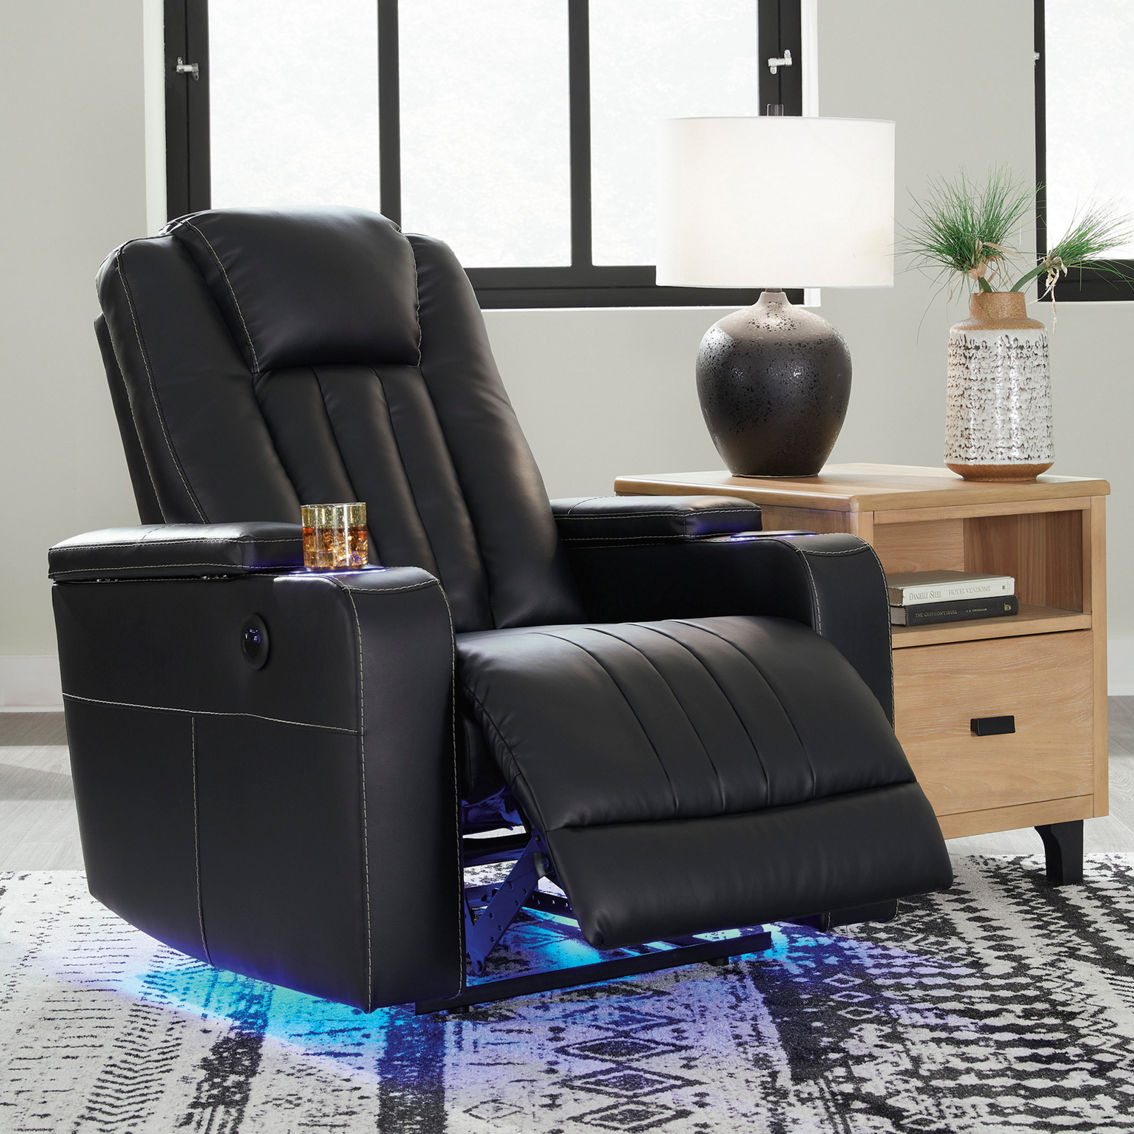 Signature Design by Ashley Center Point Recliner - Image 2 of 10